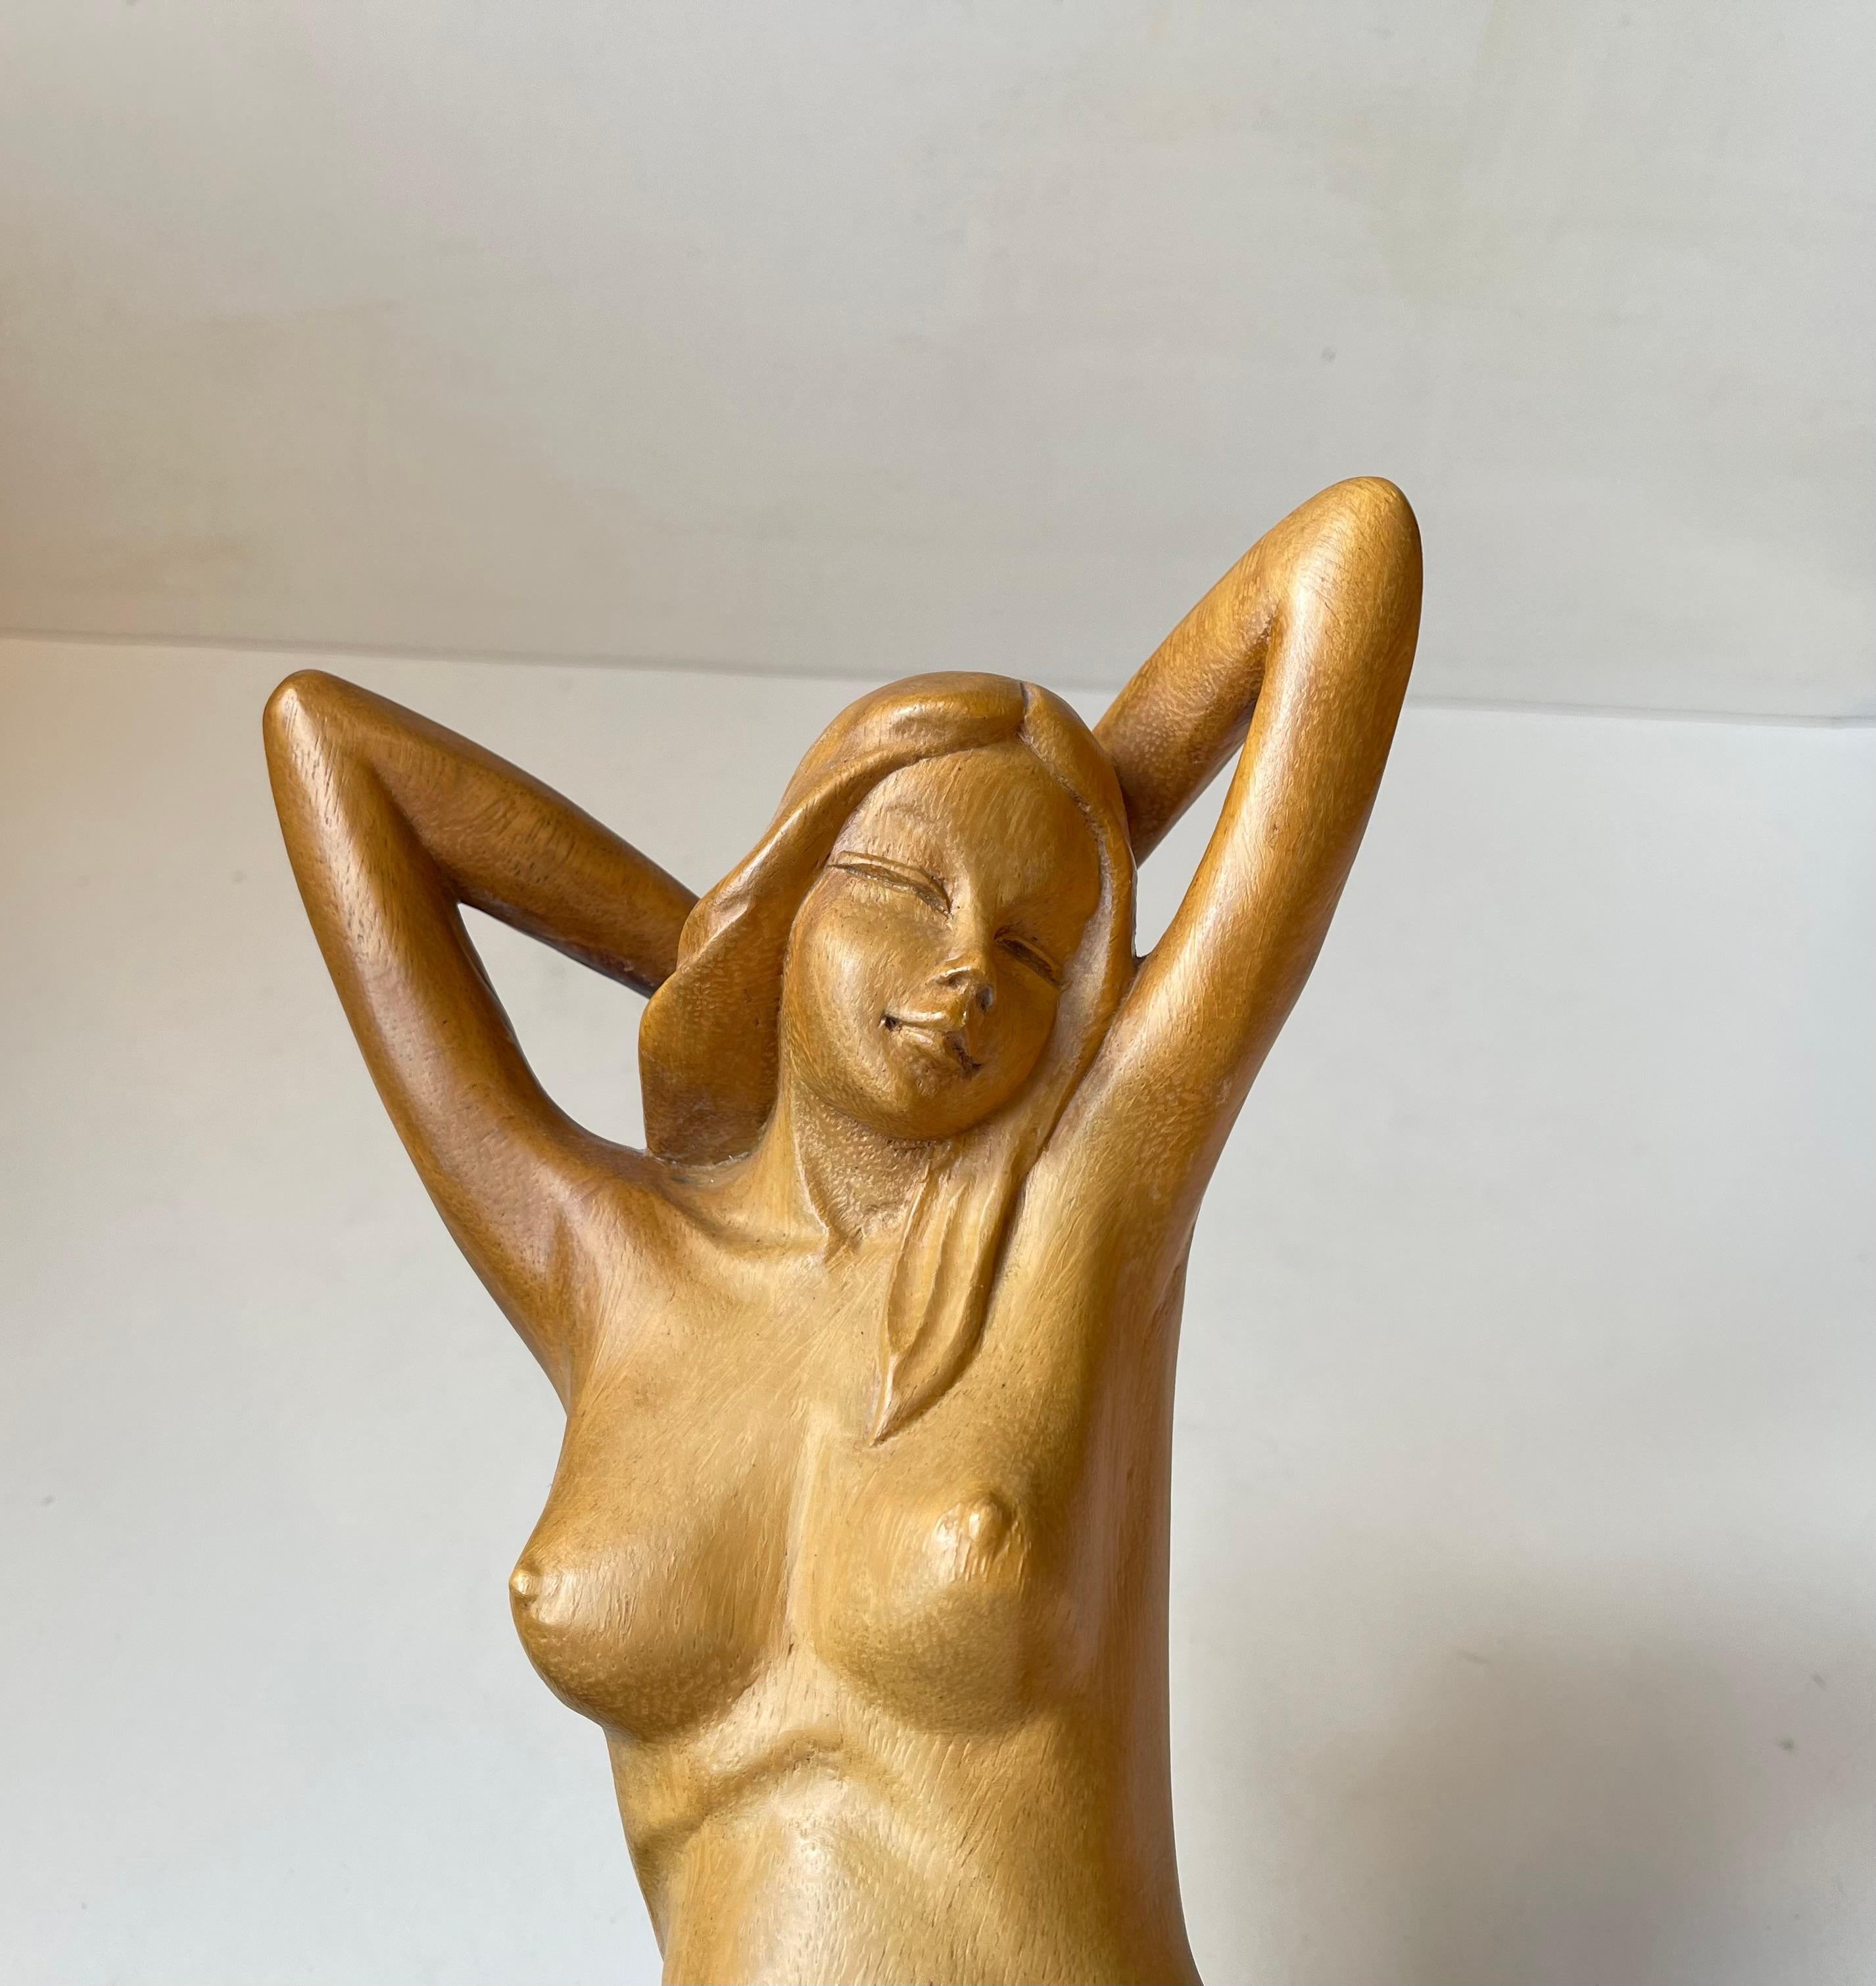 Hand-Crafted Art Deco Sculpture of Nude Female in Hand-Carved Wood, 1940s Scandinavia For Sale